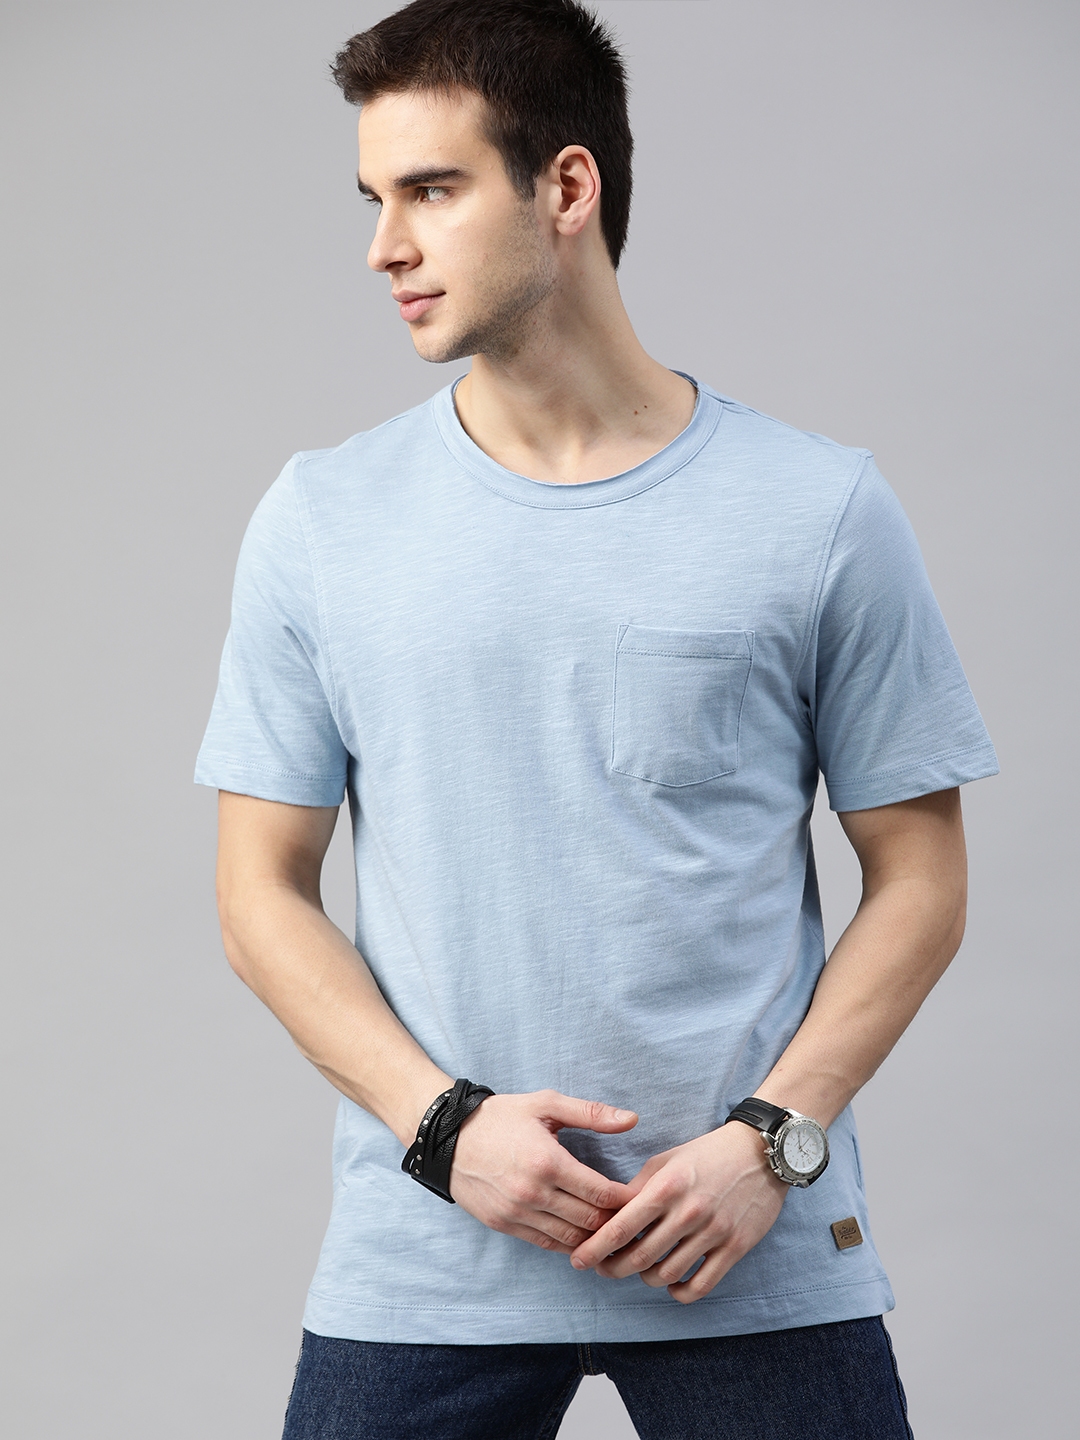 Buy Roadster Men Blue Solid Round Neck Pure Cotton T Shirt Tshirts For Men 11126616 Myntra 1540